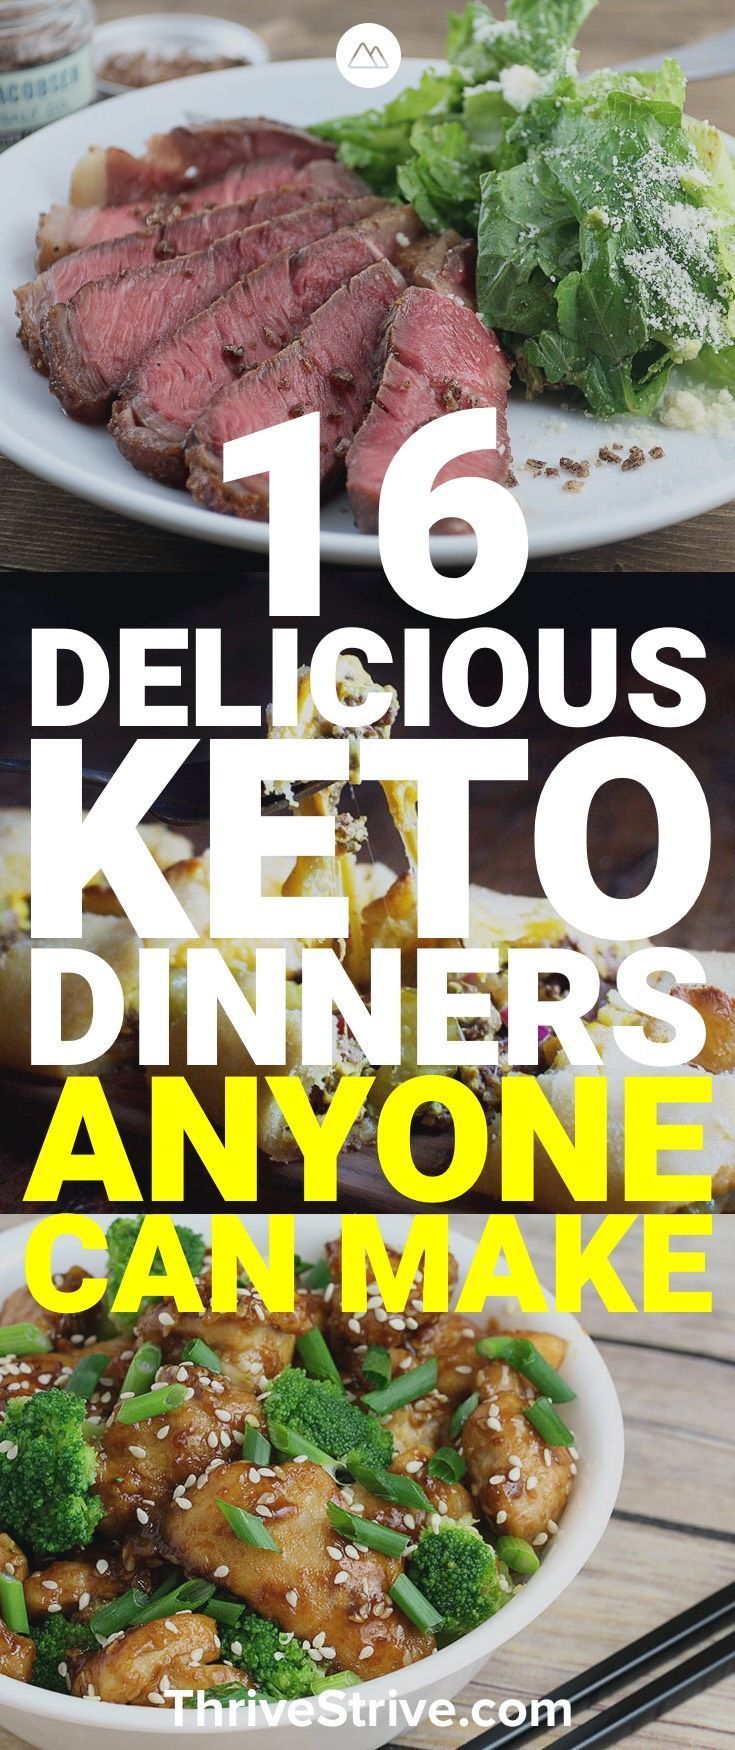 Looking for keto dinners that you can easily prepare? Here are 16 awesome low carb dinners to help you stay on track with the